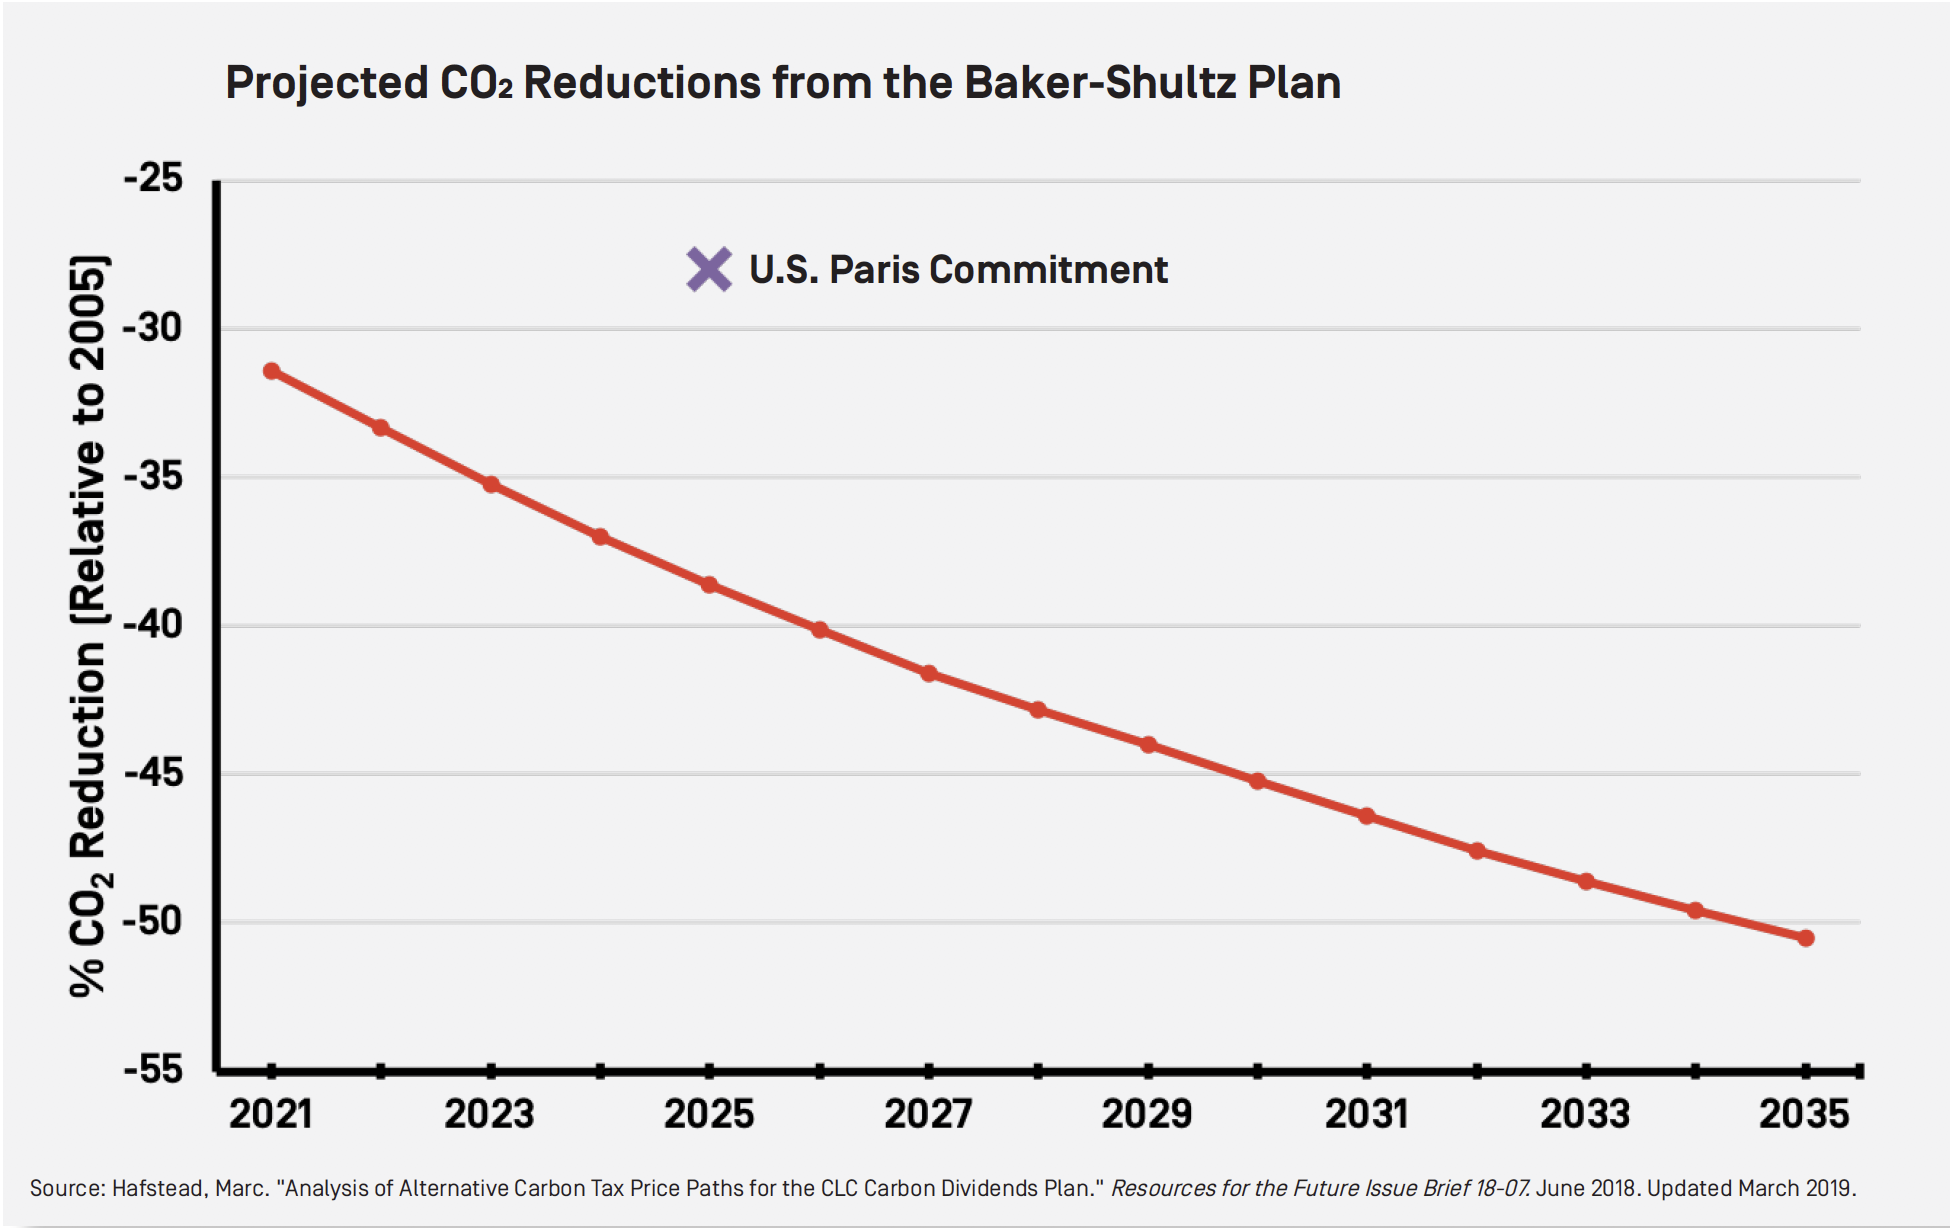 Chart of Projected CO2 reductions from the Baker-Shultz Plan